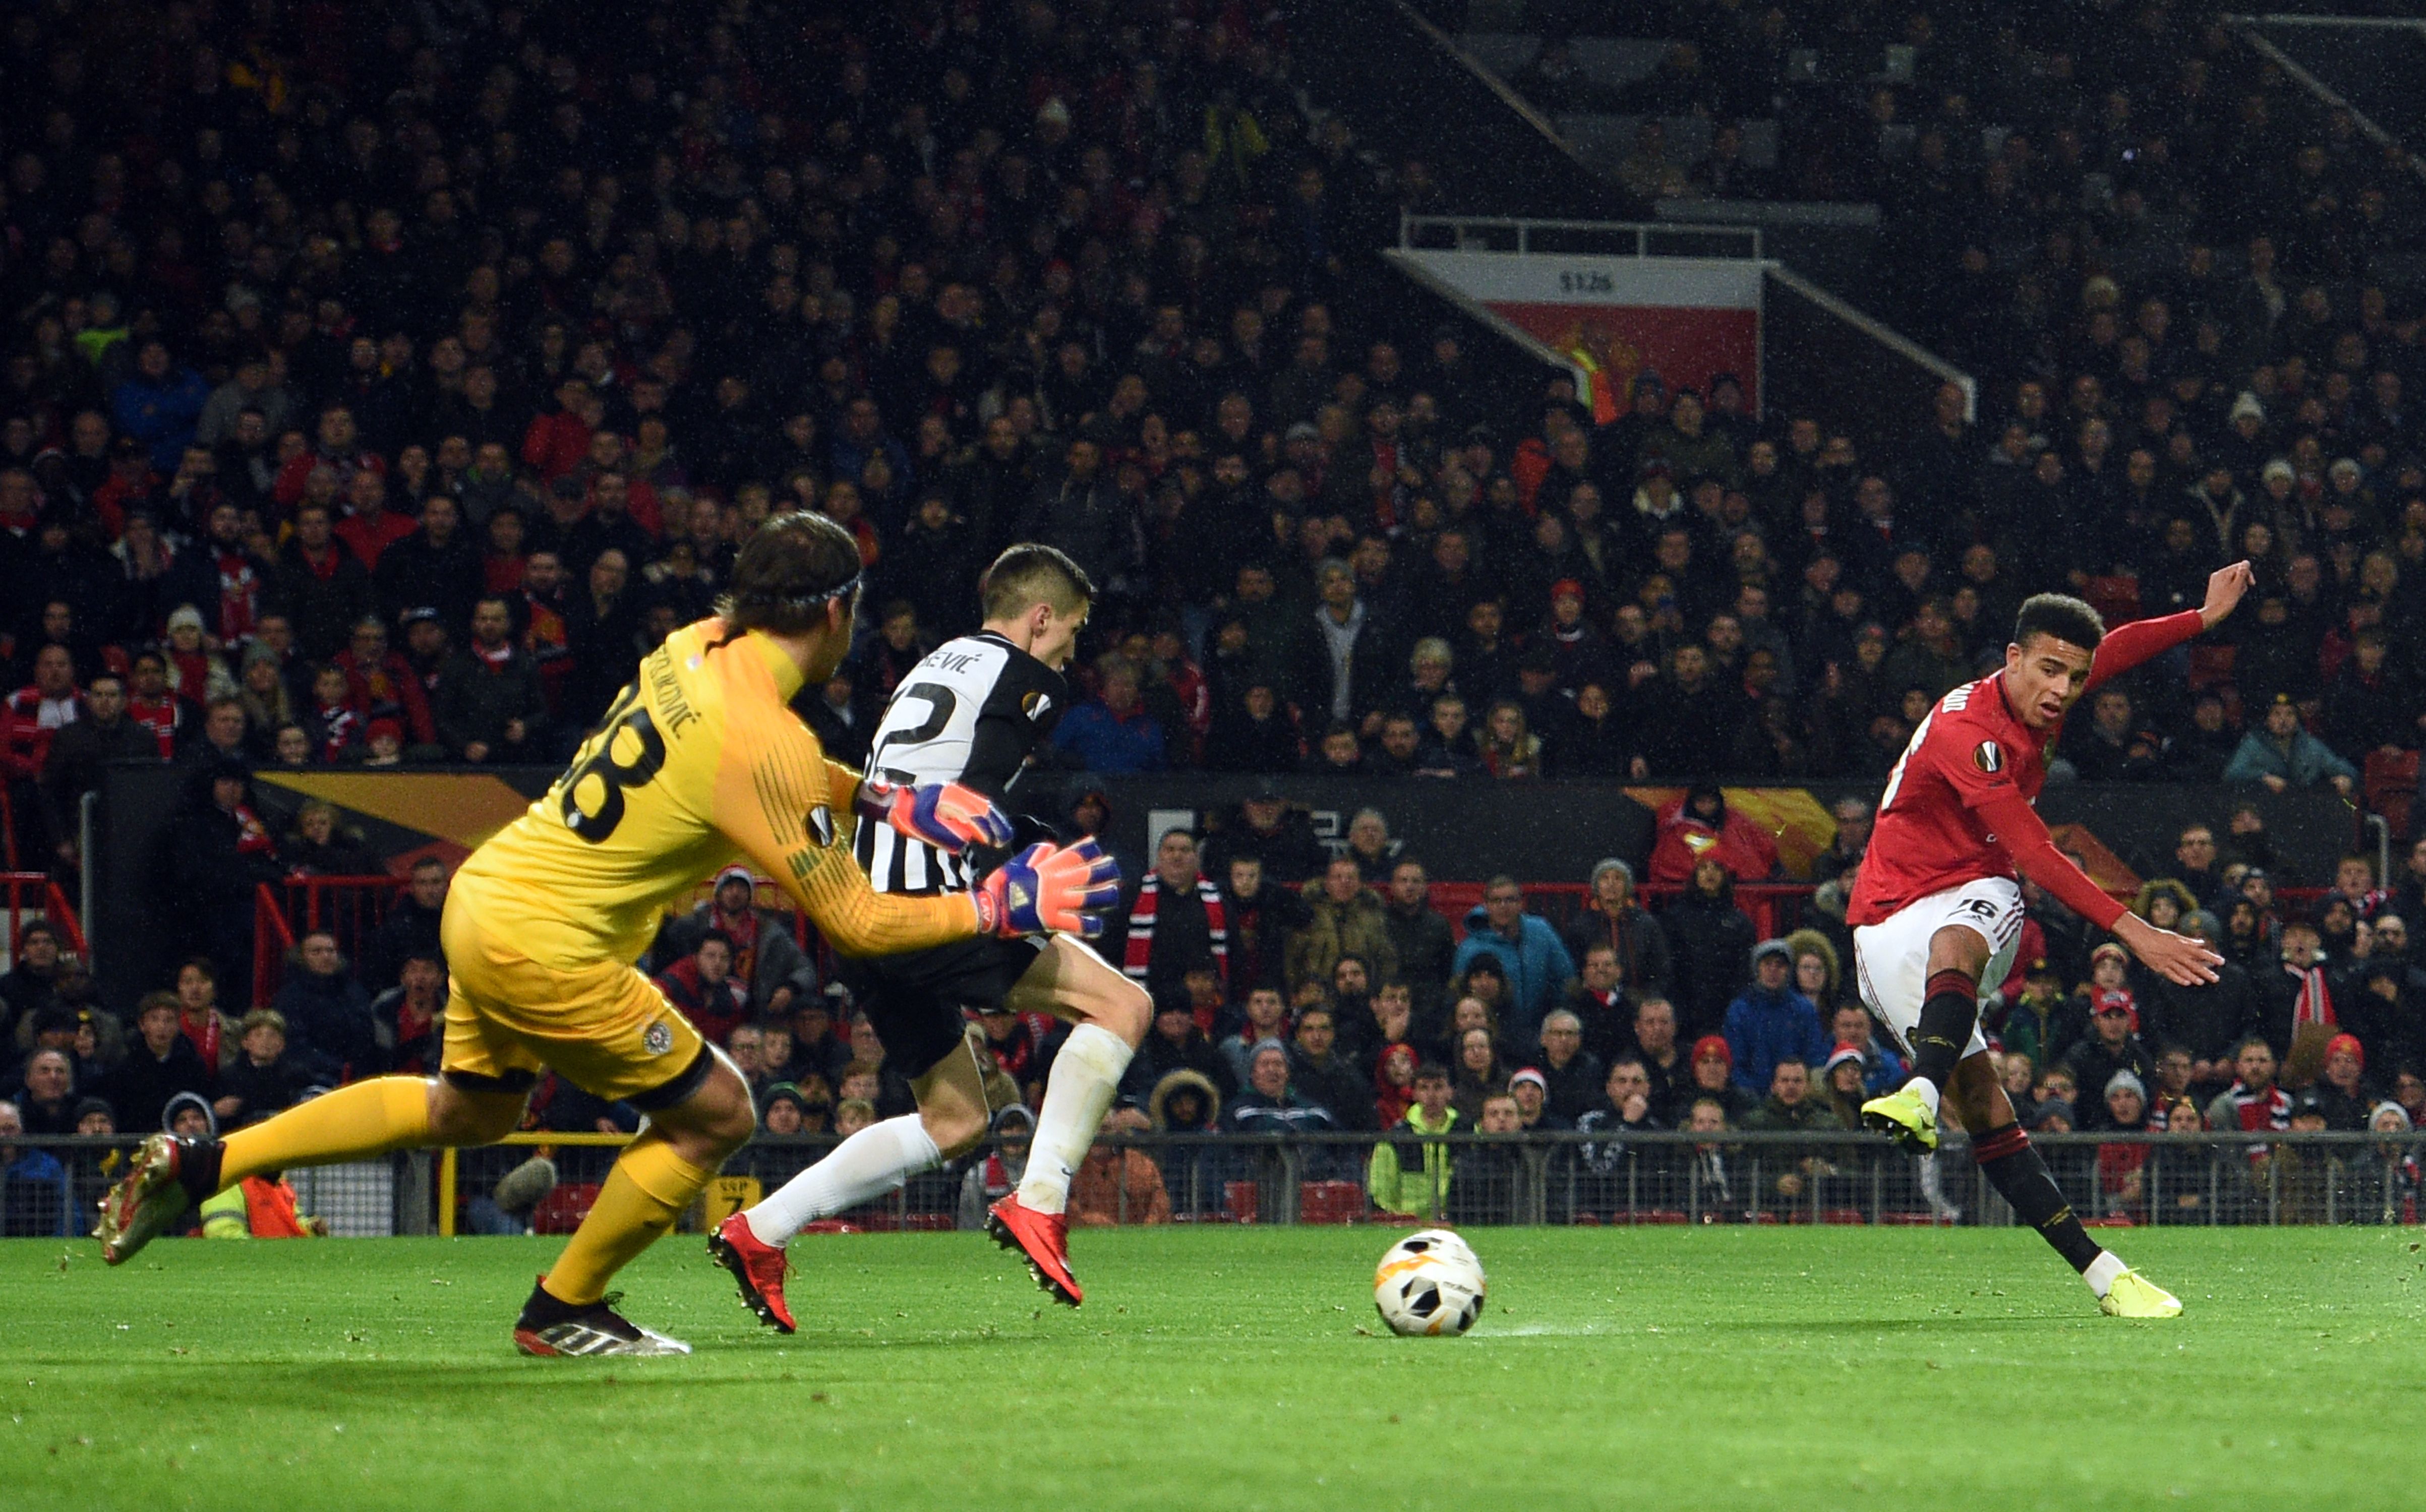 Greenwood scored his second Europa League goal (Photo by OLI SCARFF/AFP via Getty Images)